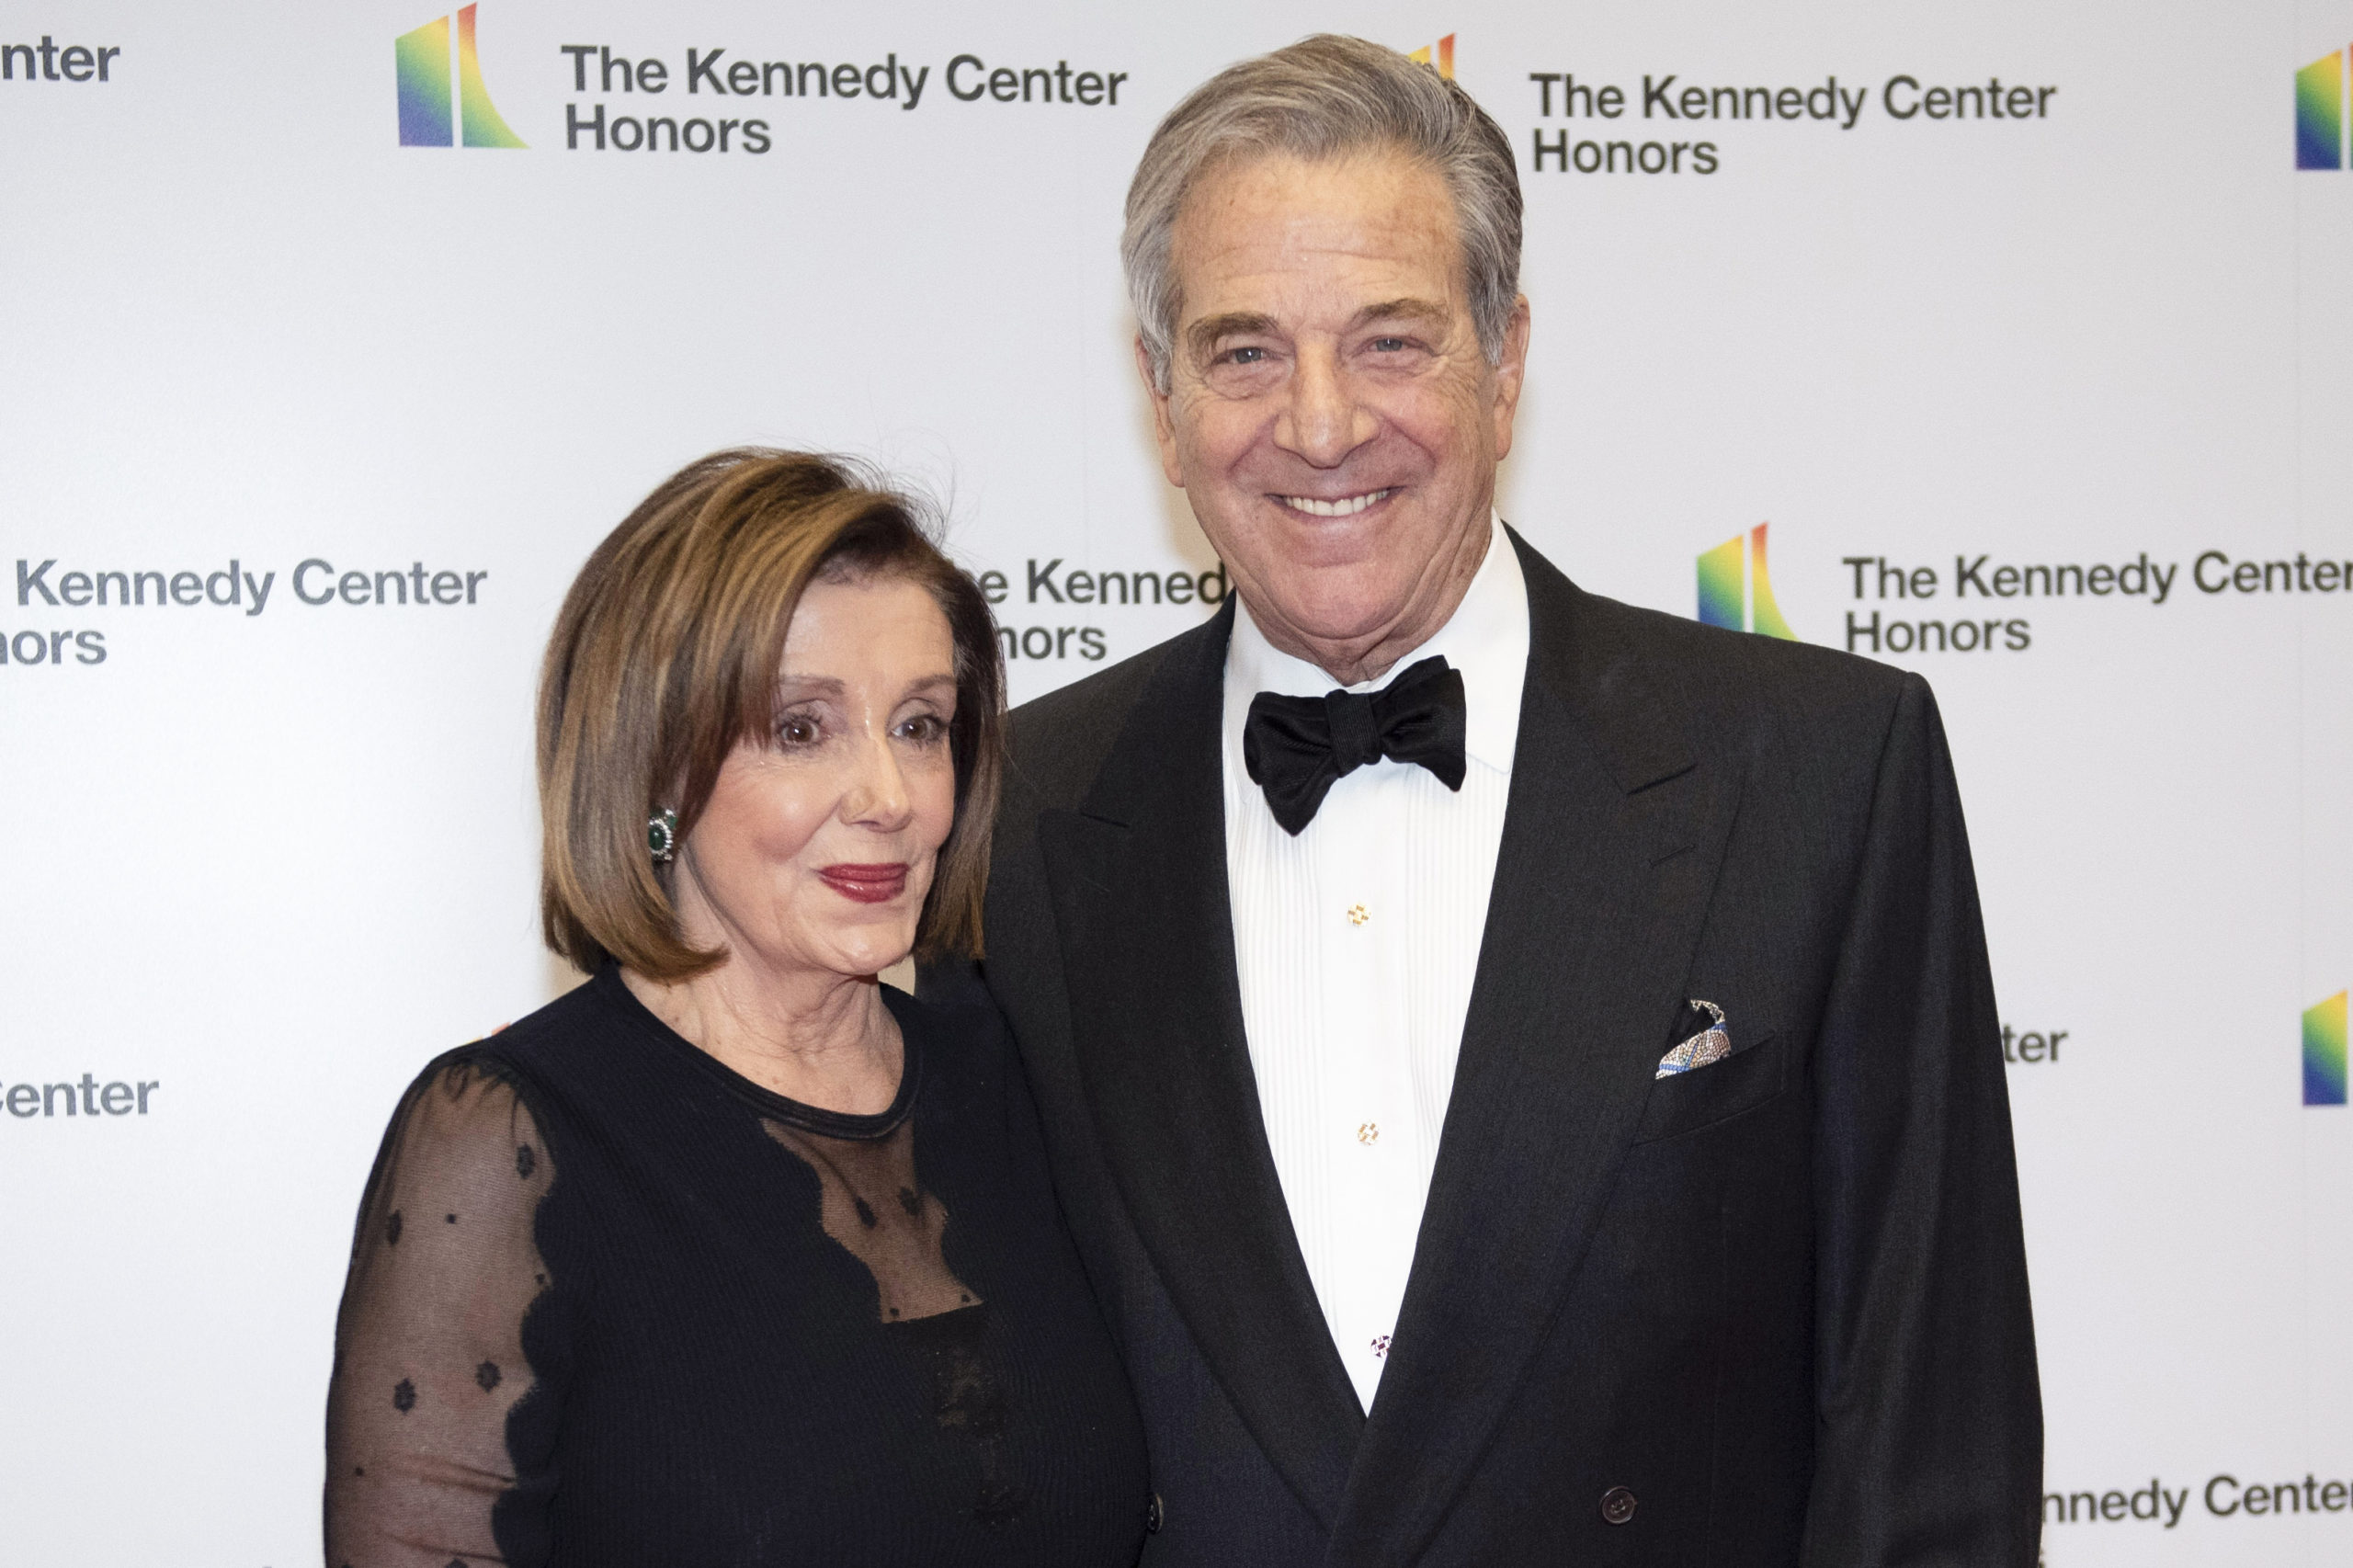 Speaker of the House Nancy Pelosi and her husband, Paul Pelosi, arrive at the State Department for the Kennedy Center Honors State Department Dinner, in Washington, D.C., on Dec. 7, 2019.